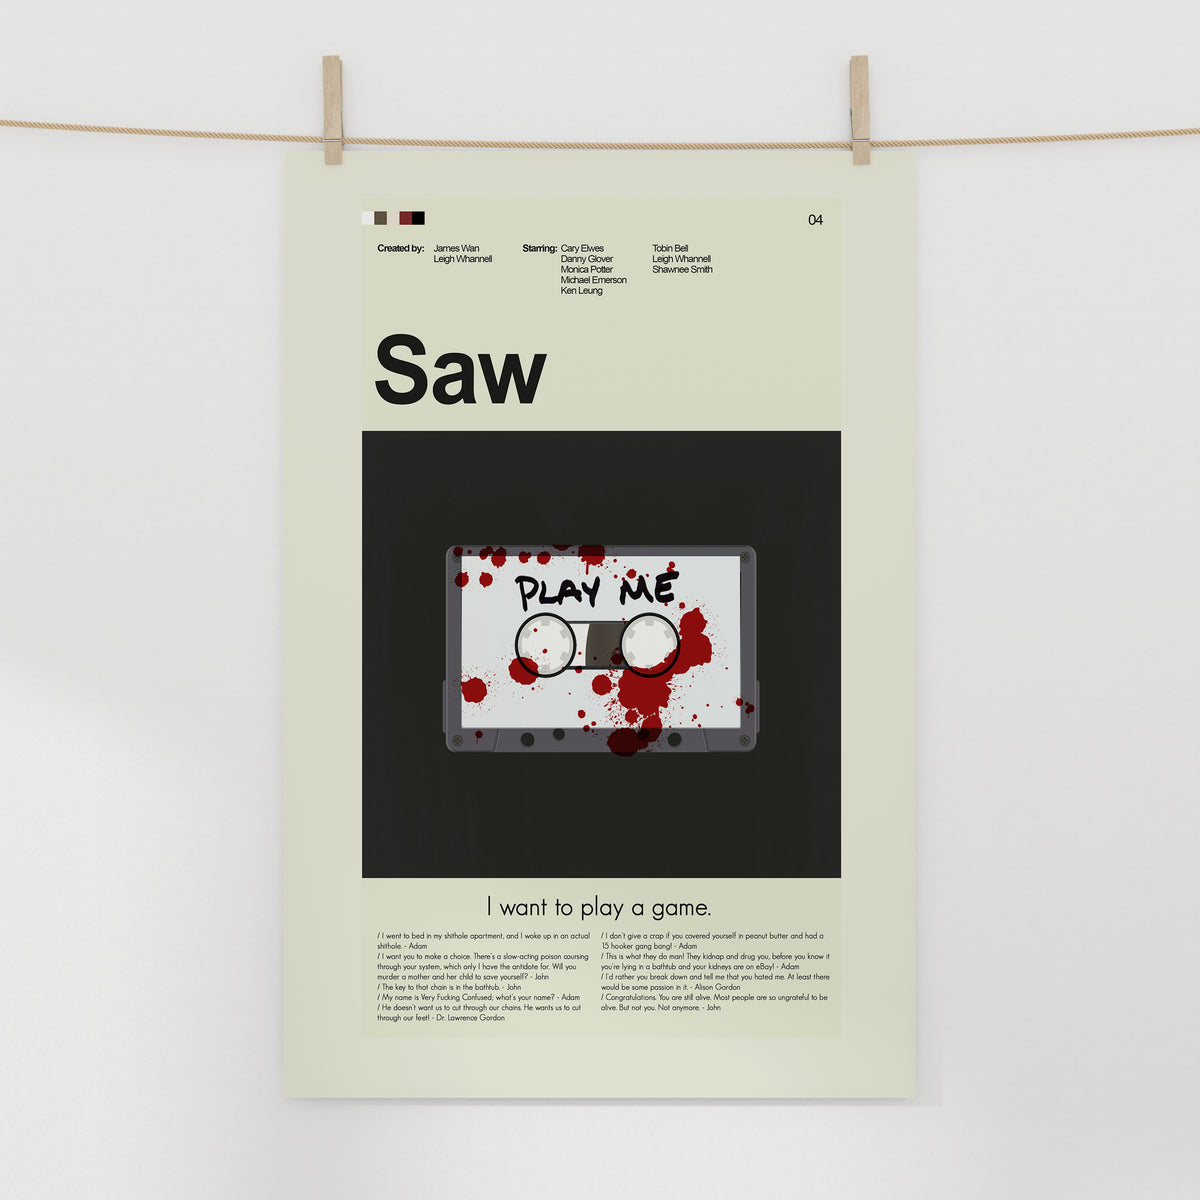 Saw - "Play Me" Tape | 12"x18" or 18"x24" Print only